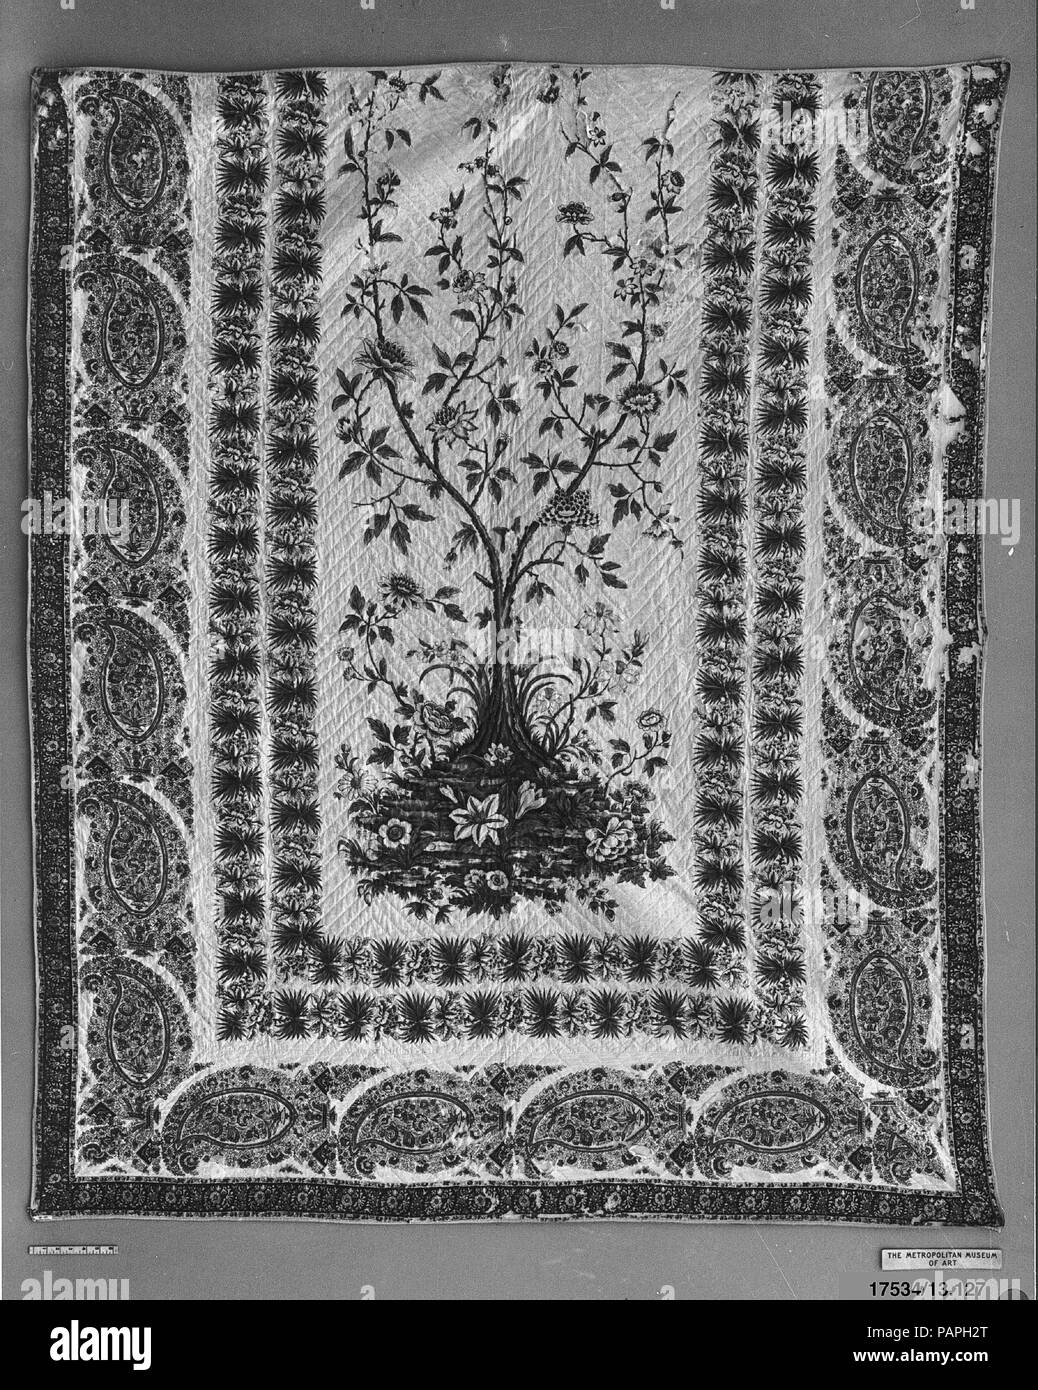 Quilt. Culture: British, Preston. Dimensions: L. 87 x W. 73 inches  221.0 x 185.4 cm. Manufactory: Bannister Hall (British, founded ca. 1798). Date: ca. 1810-15.  The Bannister Hall print works was founded ca. 1798 by Richard Jackson and John Stephenson. Between 1809 and 1825 it was owned by Charles Swainson with varying partners. It was the leading firm for woodblock 'furniture' chintzes. Museum: Metropolitan Museum of Art, New York, USA. Stock Photo